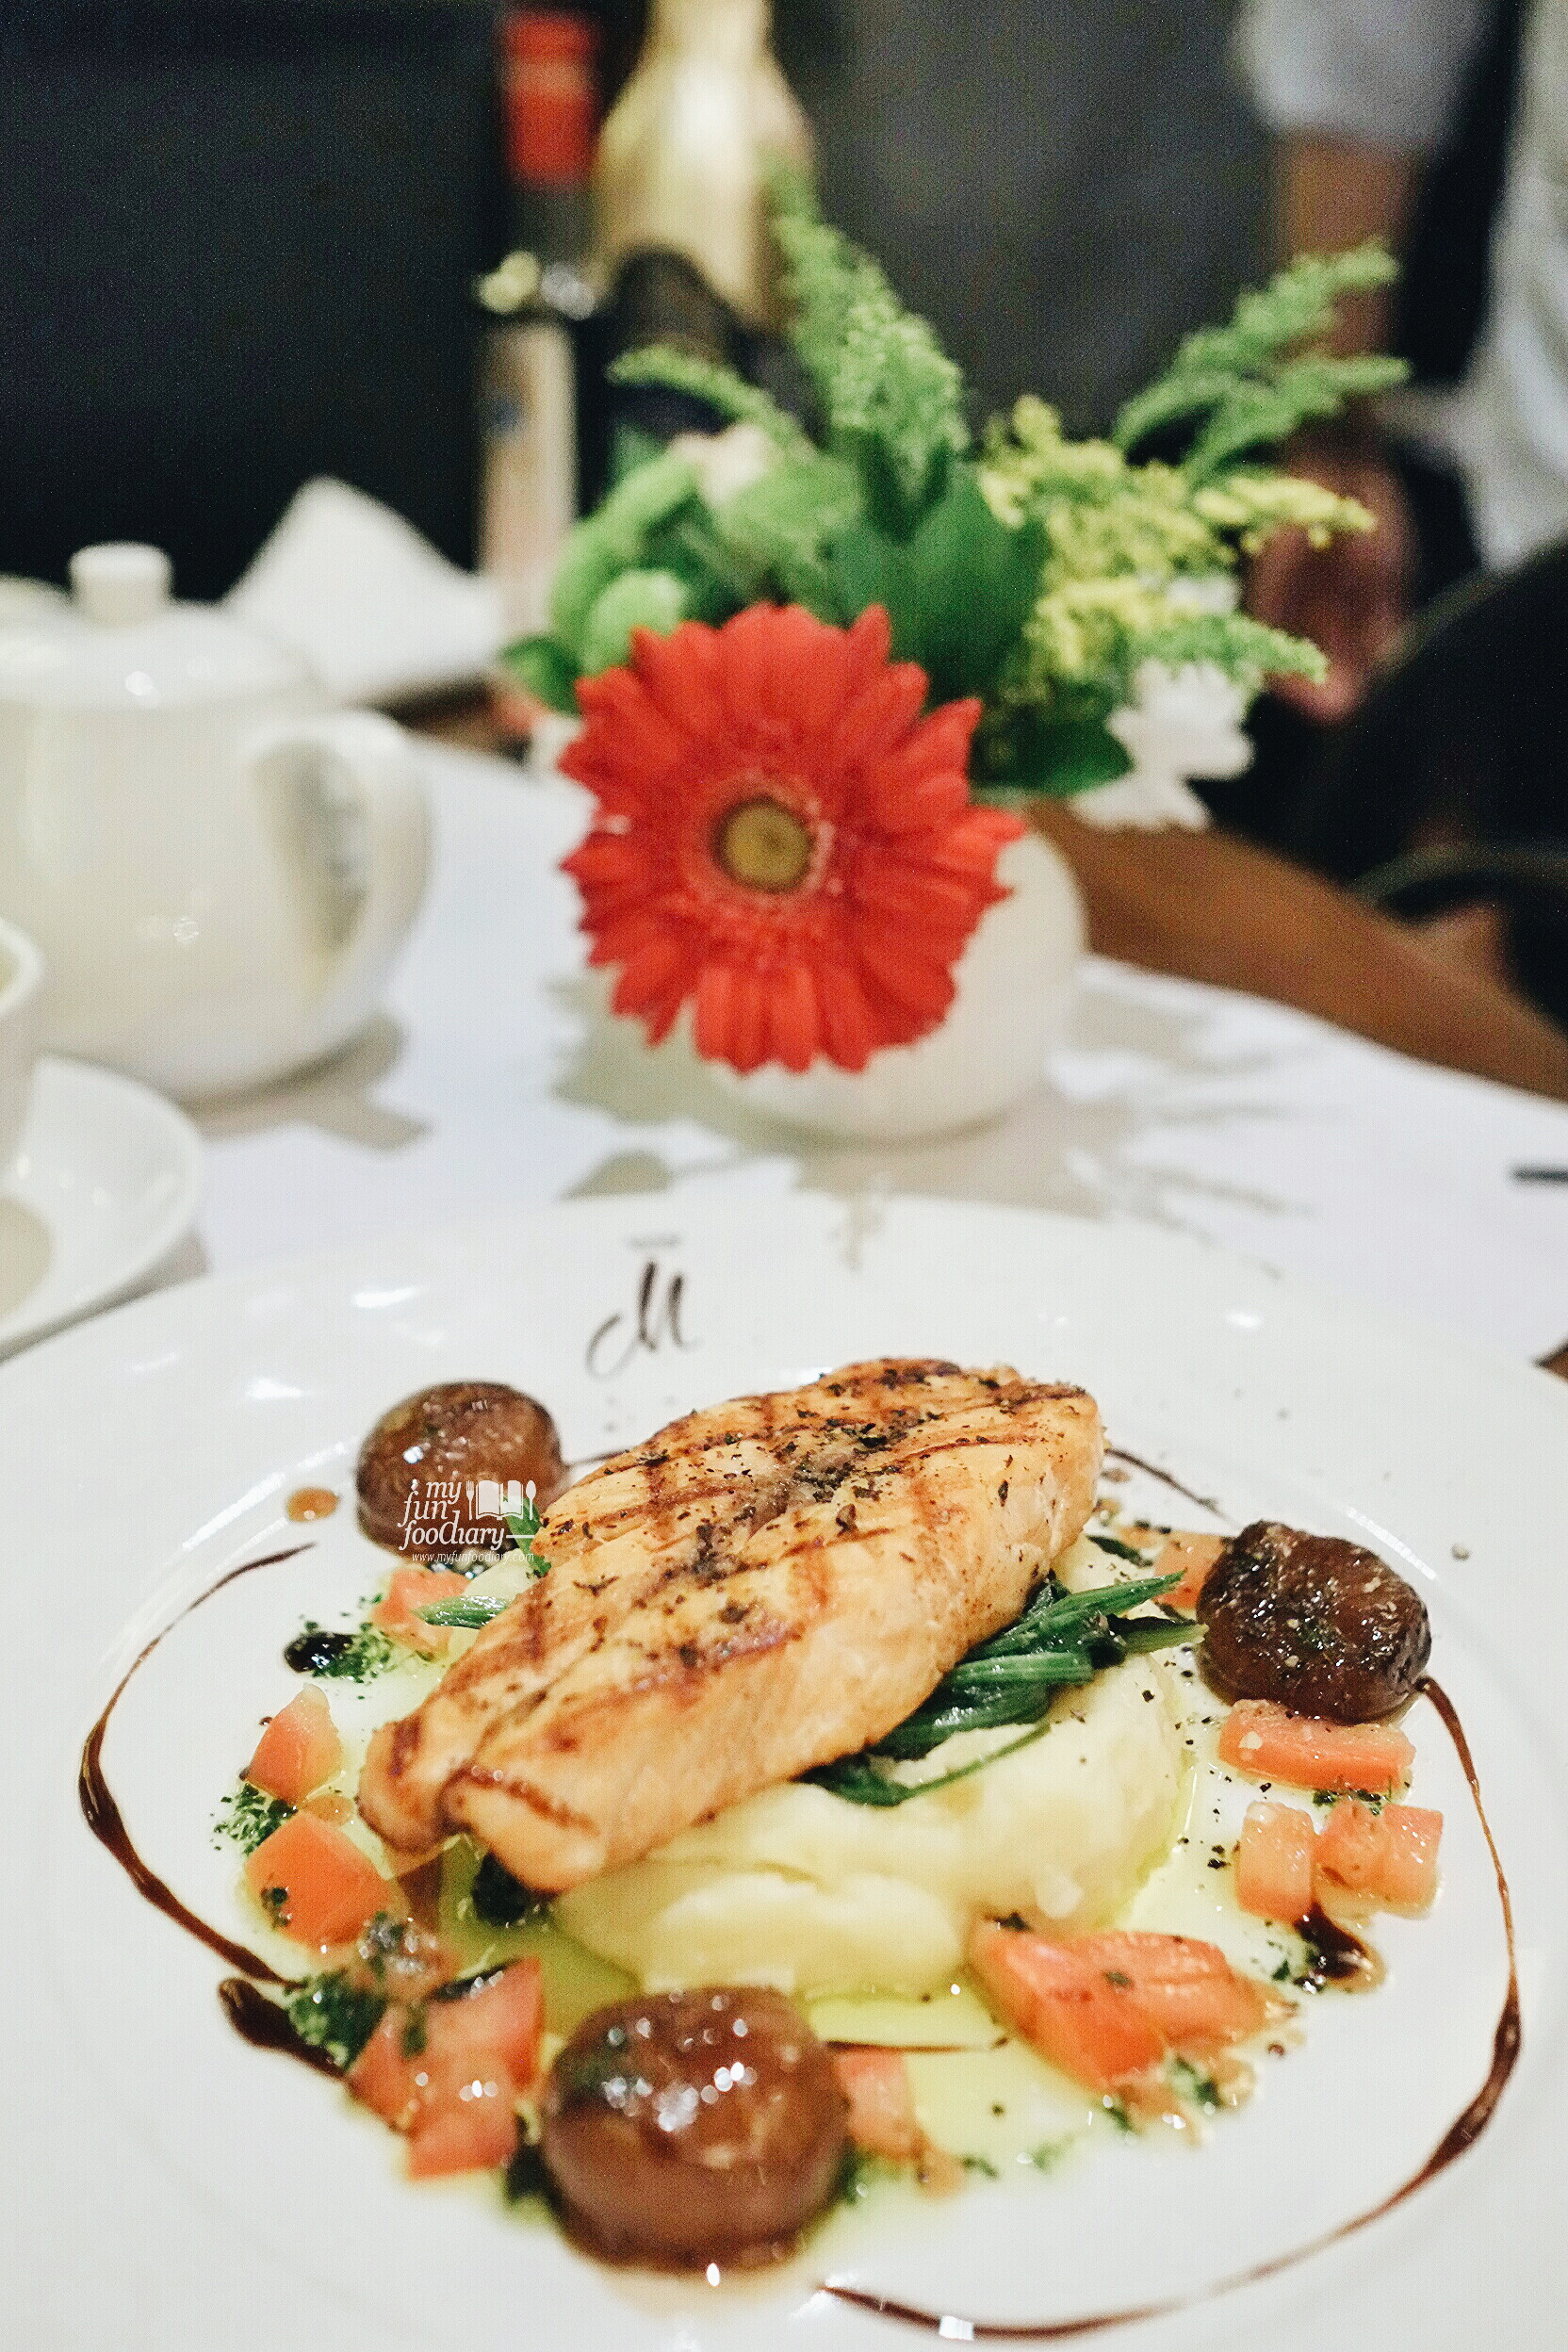 Grilled Salmon Steak at Caffe Milano by Myfunfoodiary